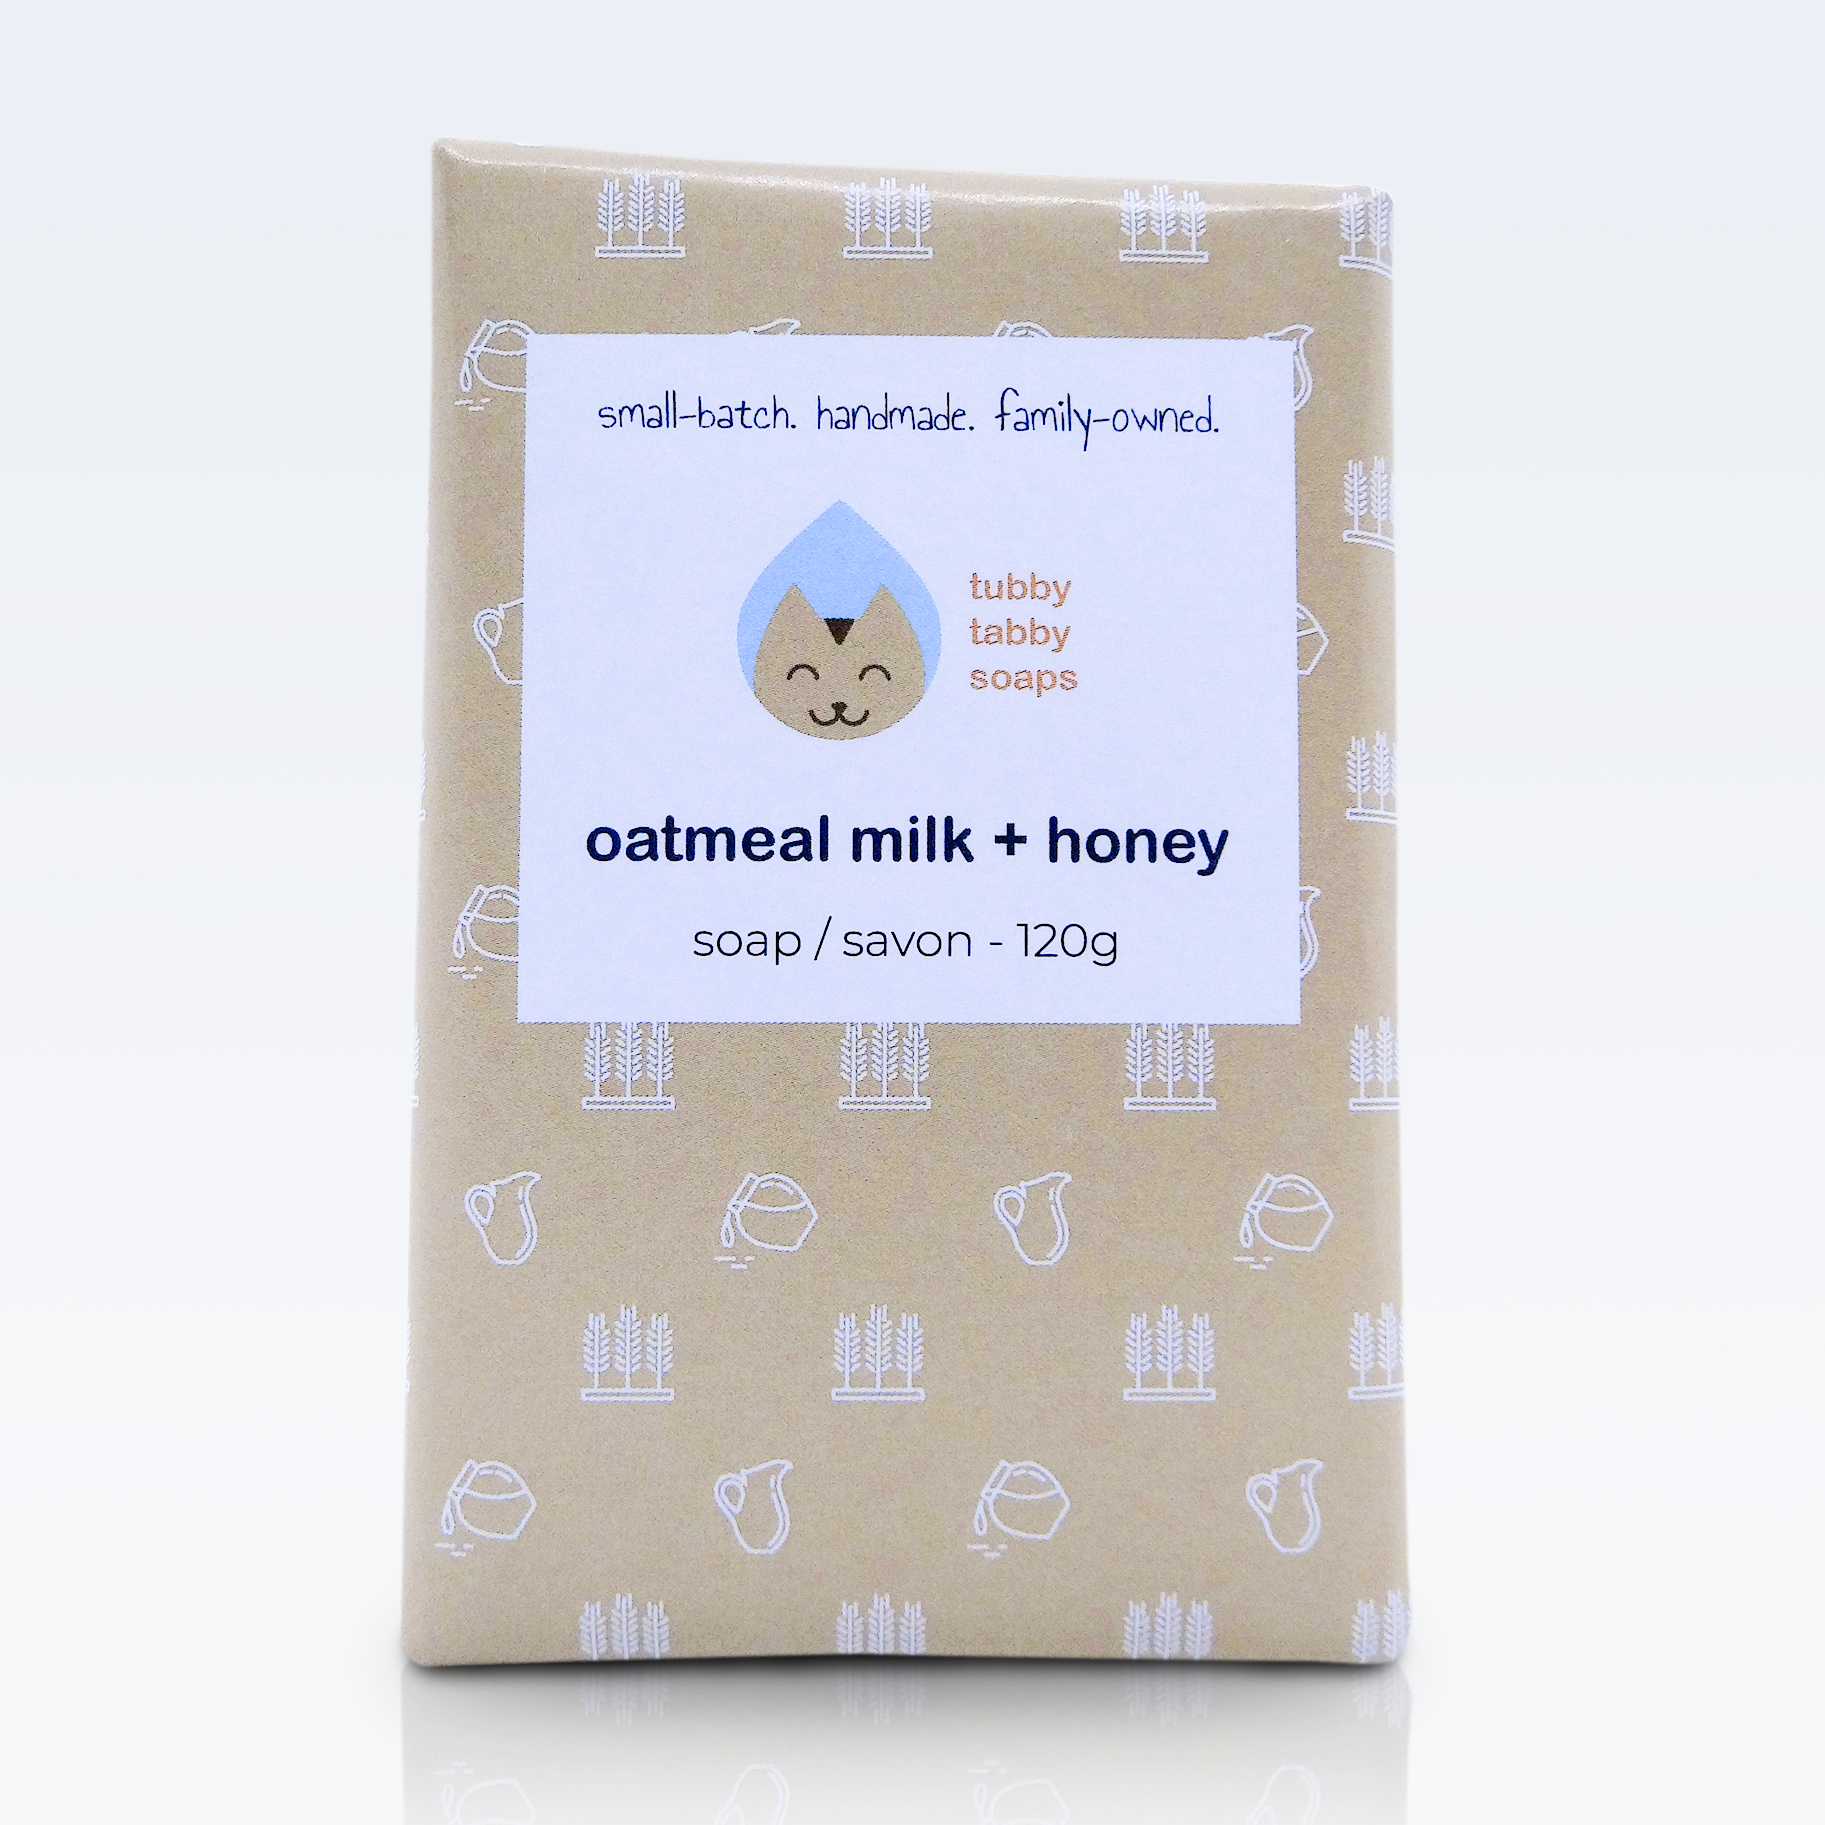 Oatmeal Milk & Honey handmade soap by Tubby Tabby Soaps (no added colour, natural gentle soap with three milks, colloidal oatmeal and raw honey)